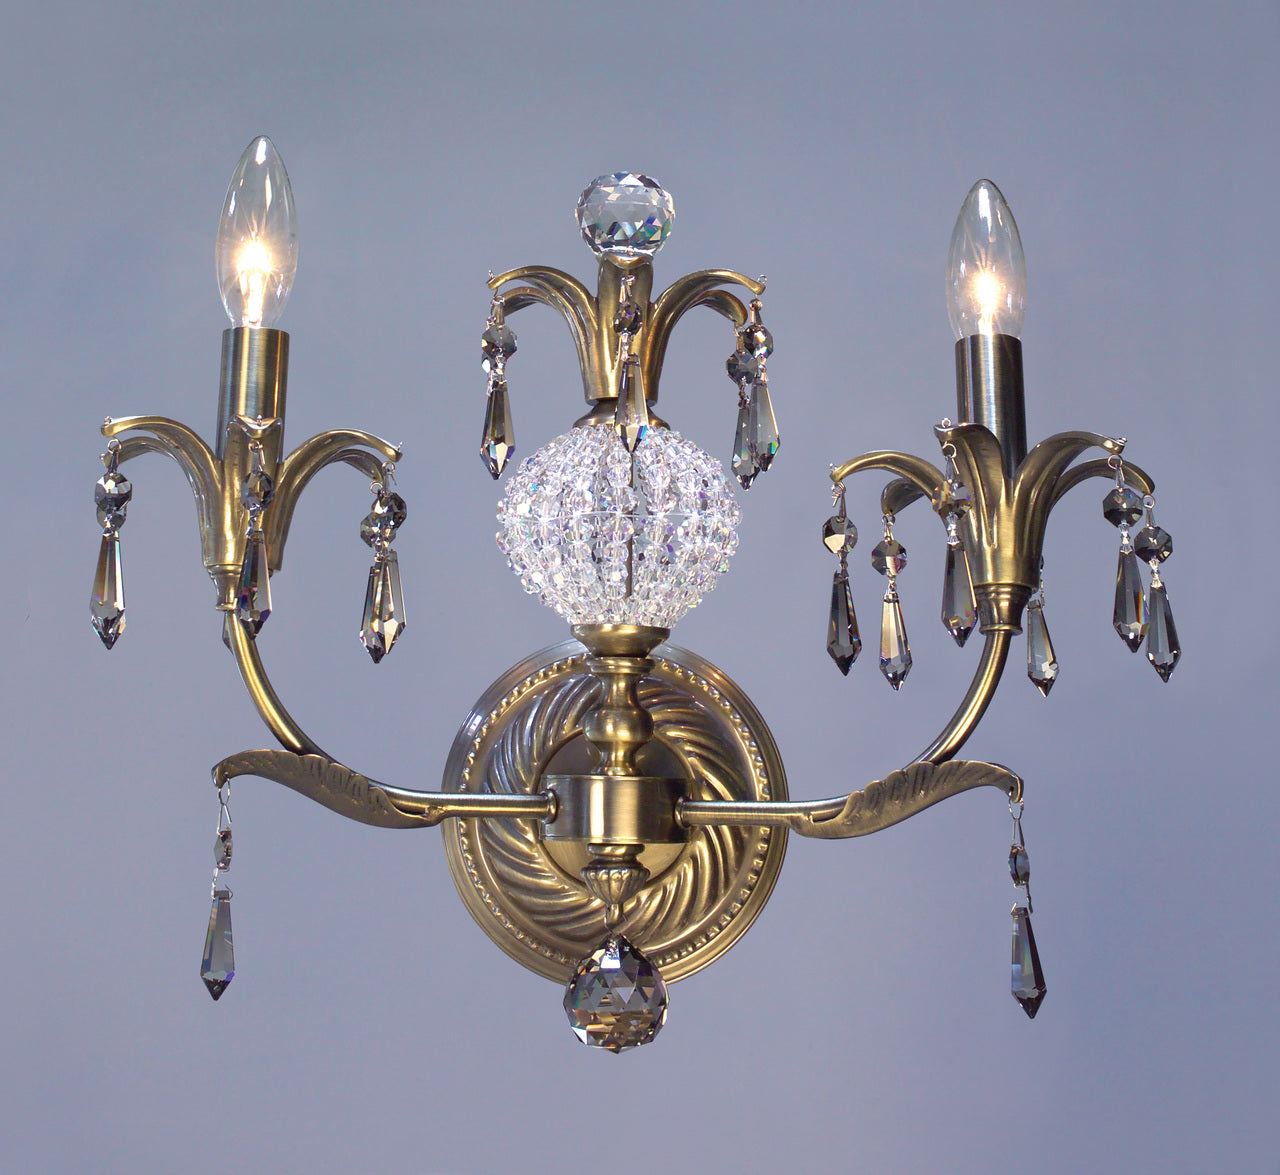 Classic Lighting 16112 ABR SMK Sharon Crystal Wall Sconce in Antique Brass